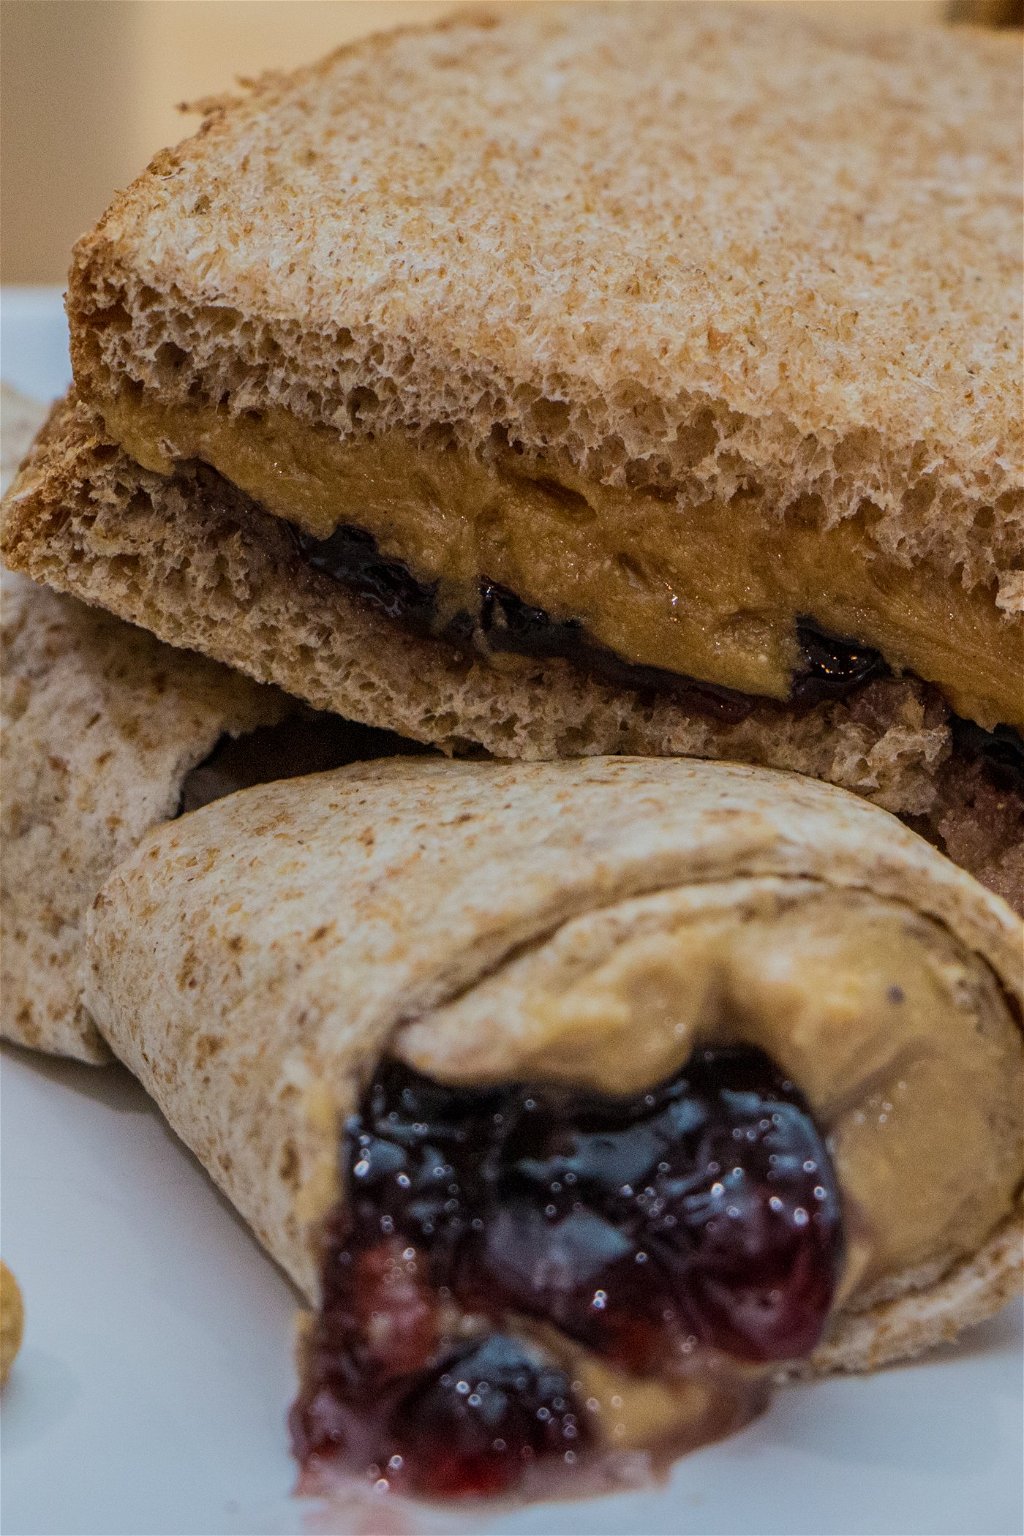 Protein Peanut Butter & Jelly Sandwiches - The Protein Chef